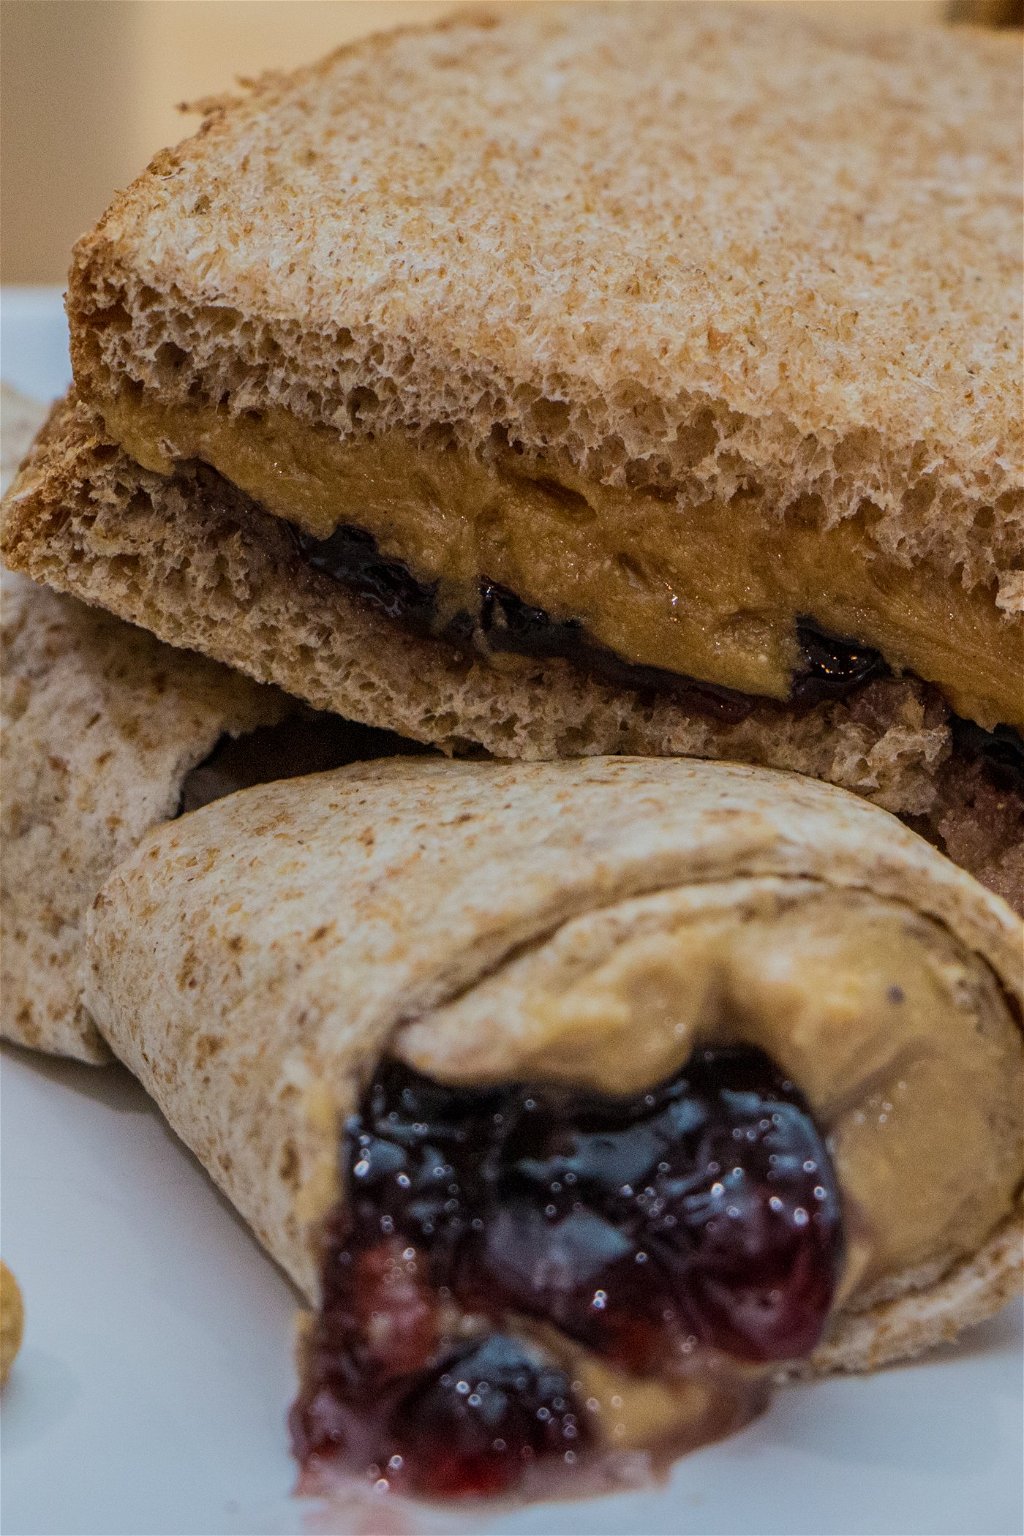 Protein Peanut Butter & Jelly Sandwiches - The Protein Chef